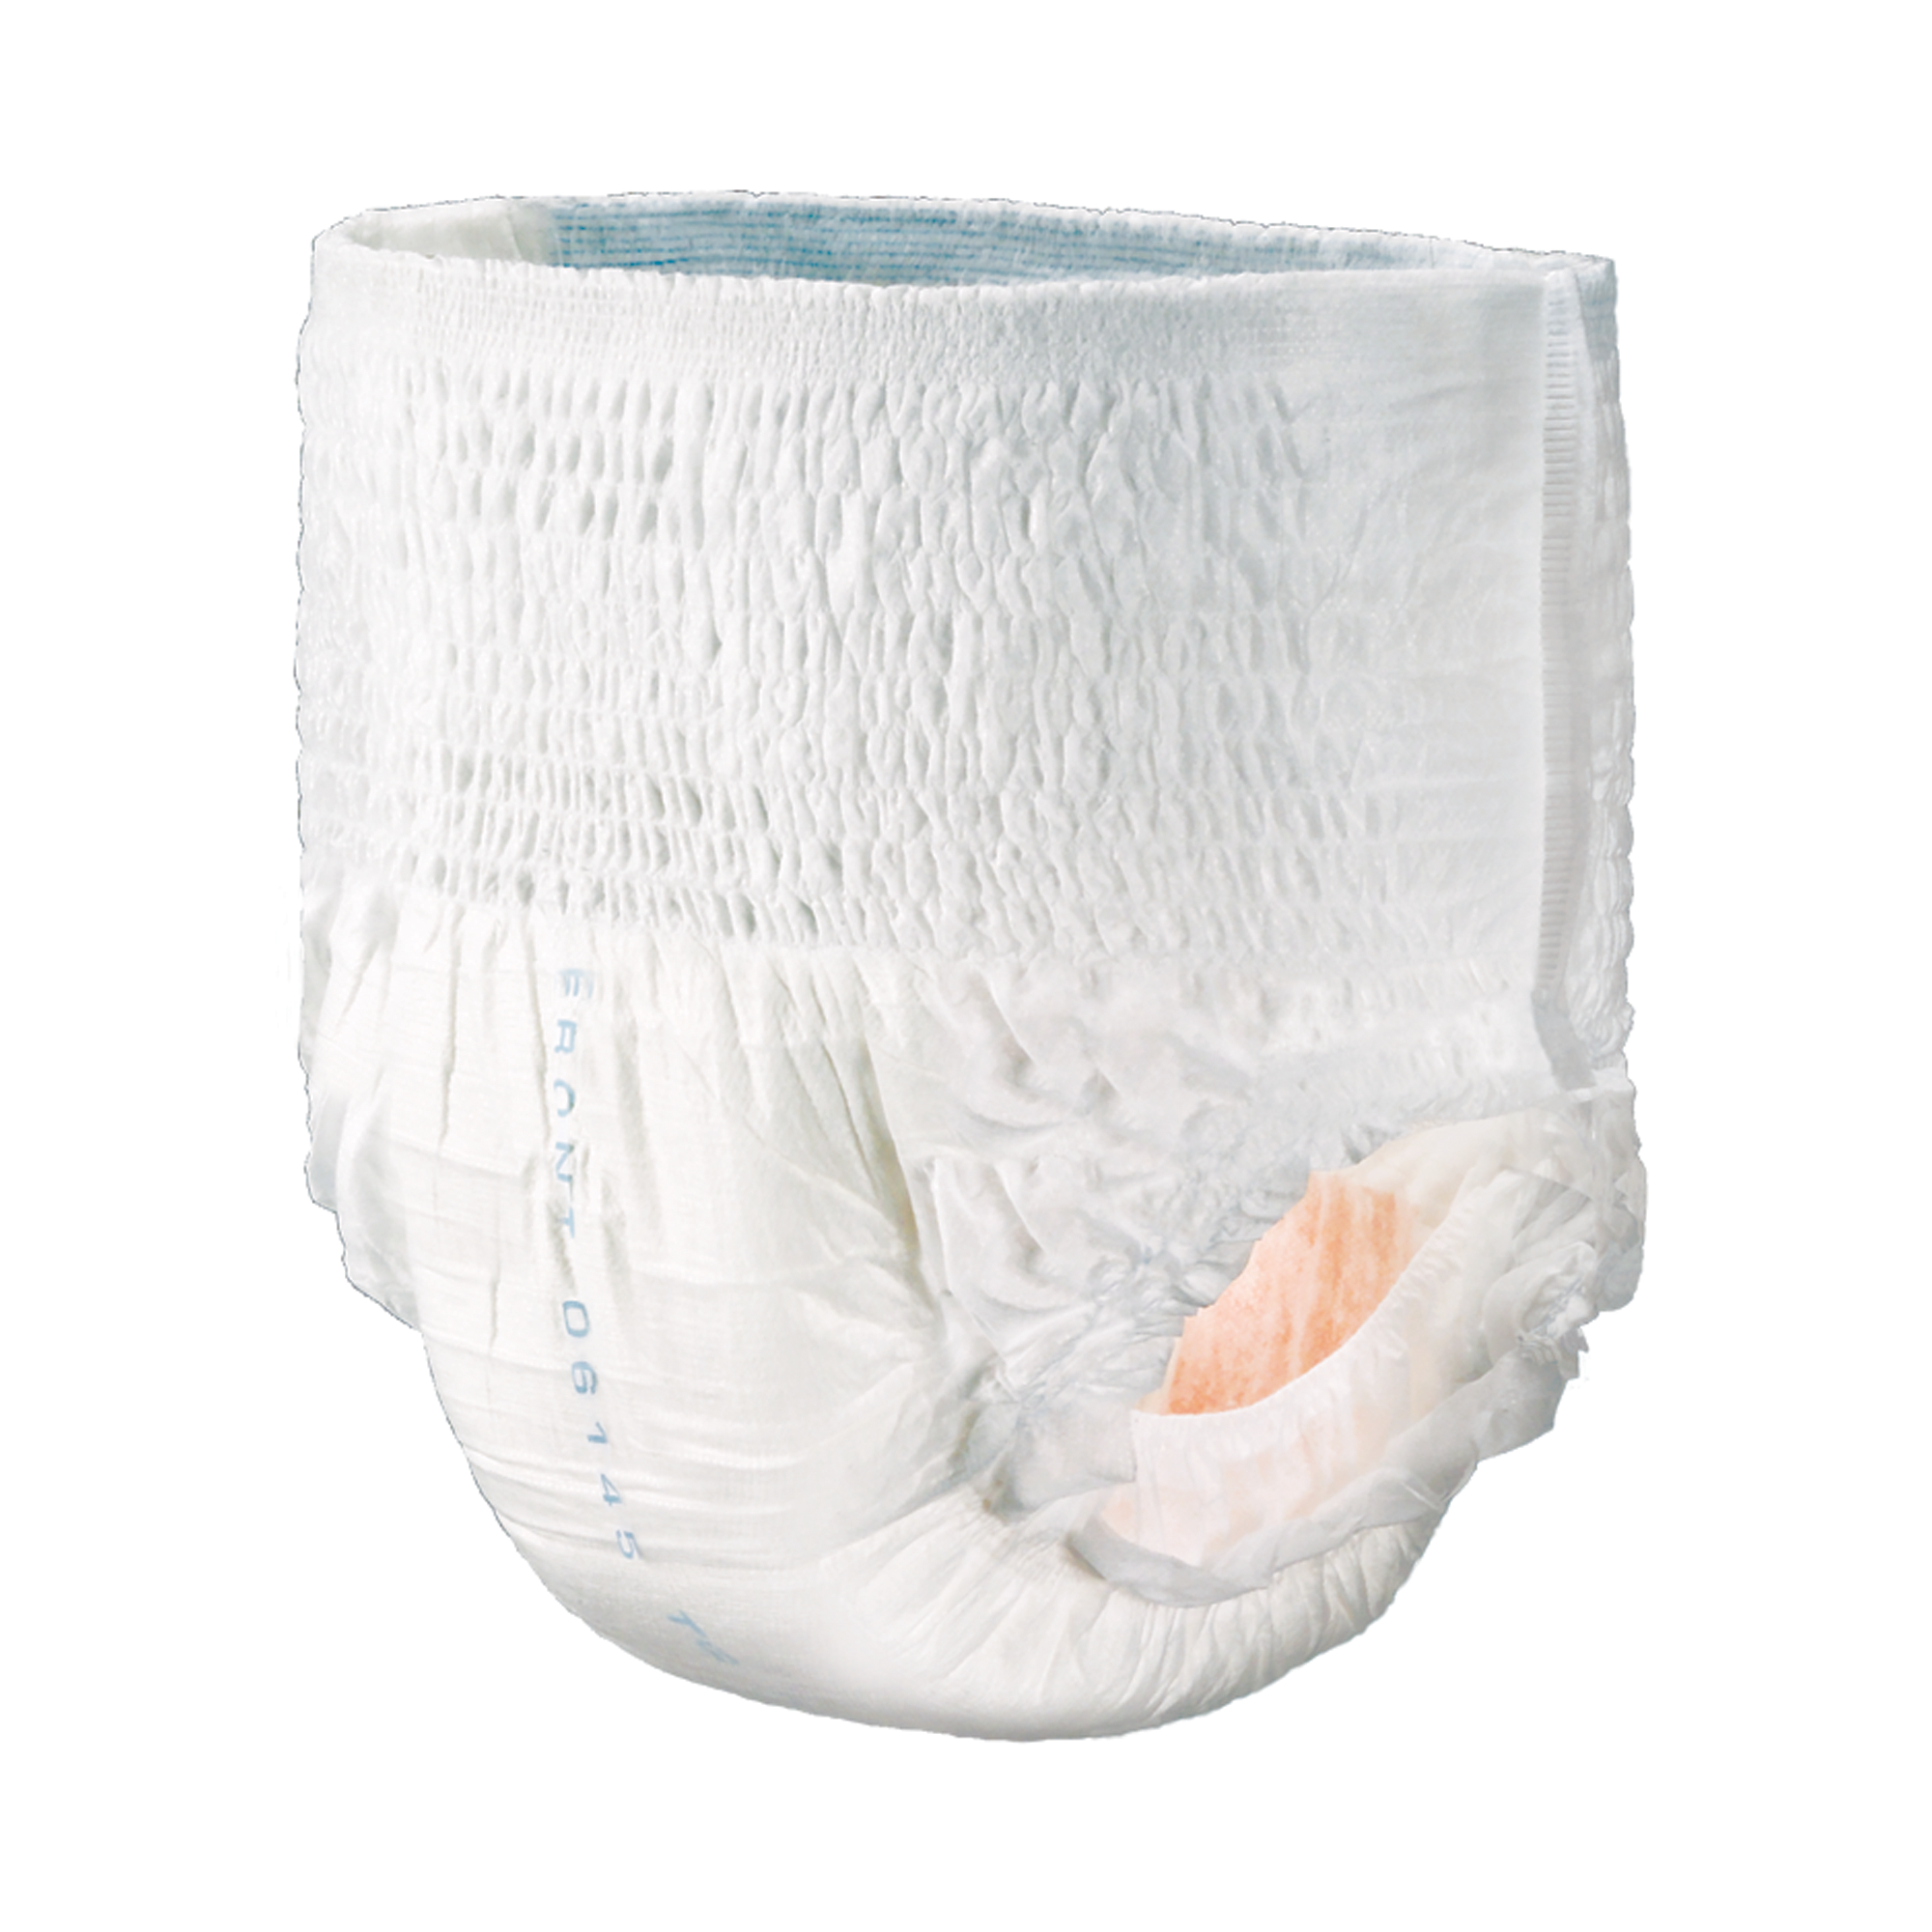 Briefs Vs. Pull Up Style Diapers: A Brief is NOT a Pull-on Diaper -  Tranquility Products